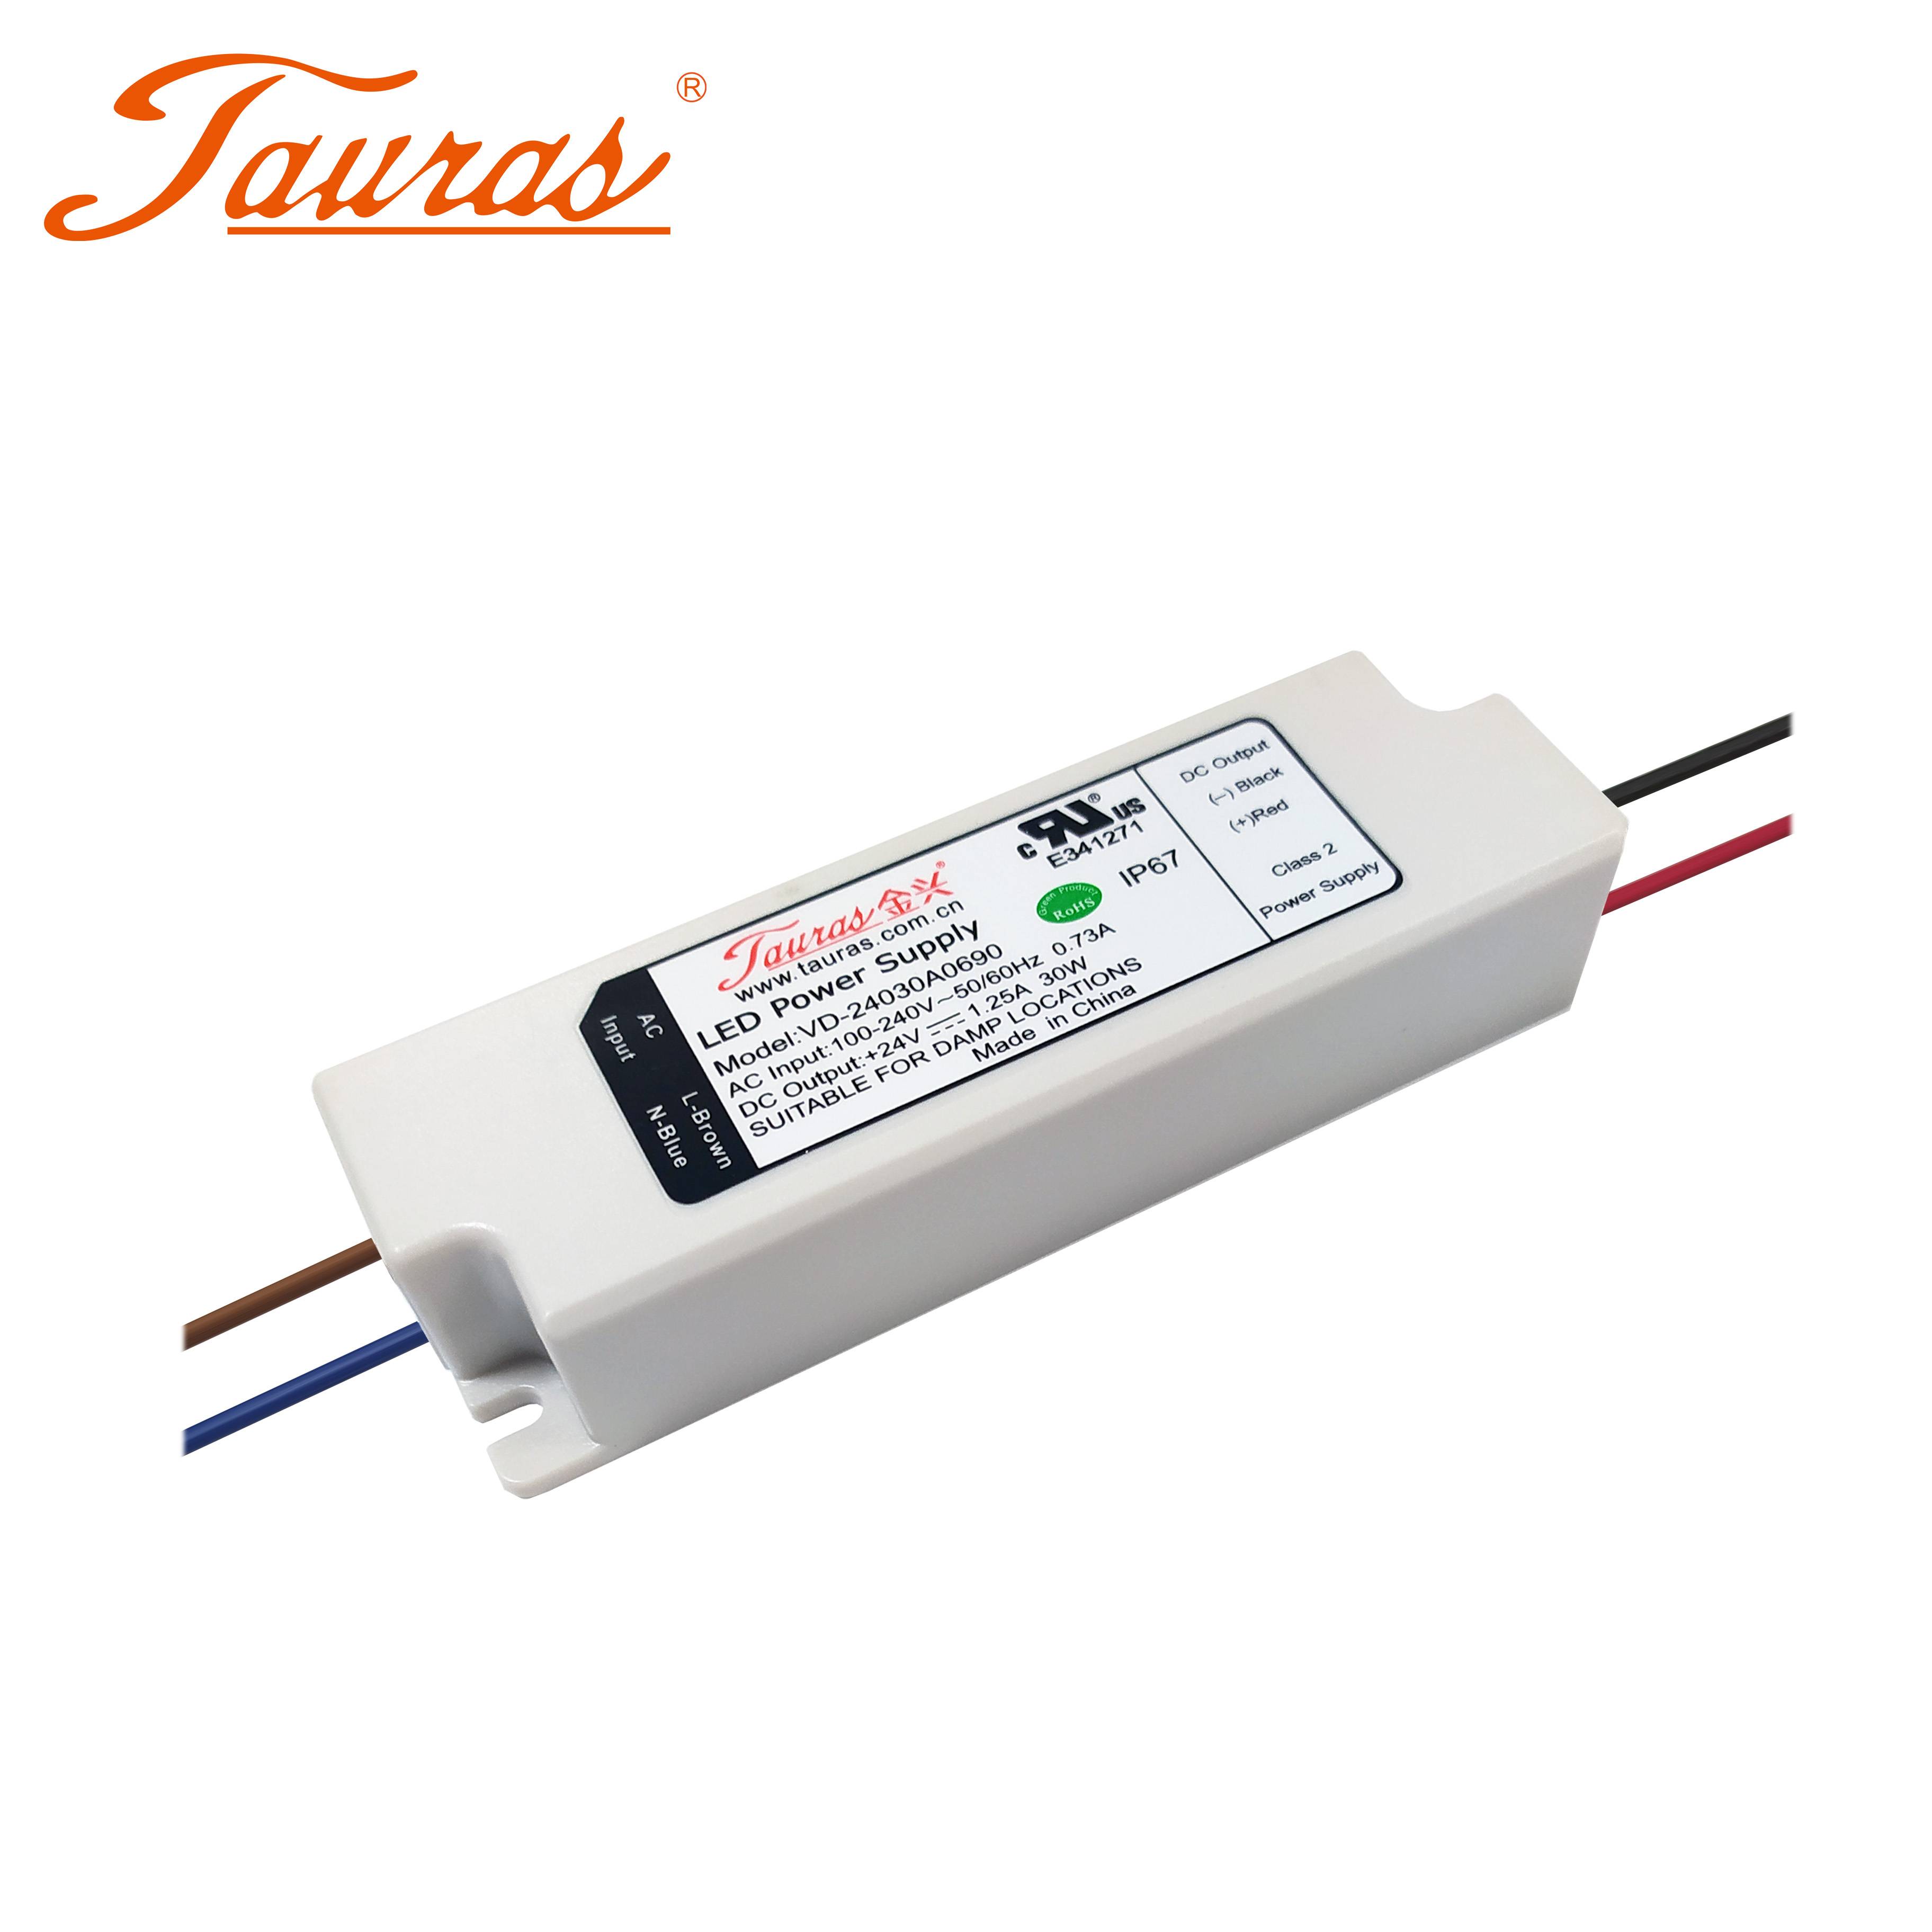 Excellent quality Led Sign Driver - 12v 24v 2.5a 30w constant voltage ip67 ac to dc led driver – Tauras